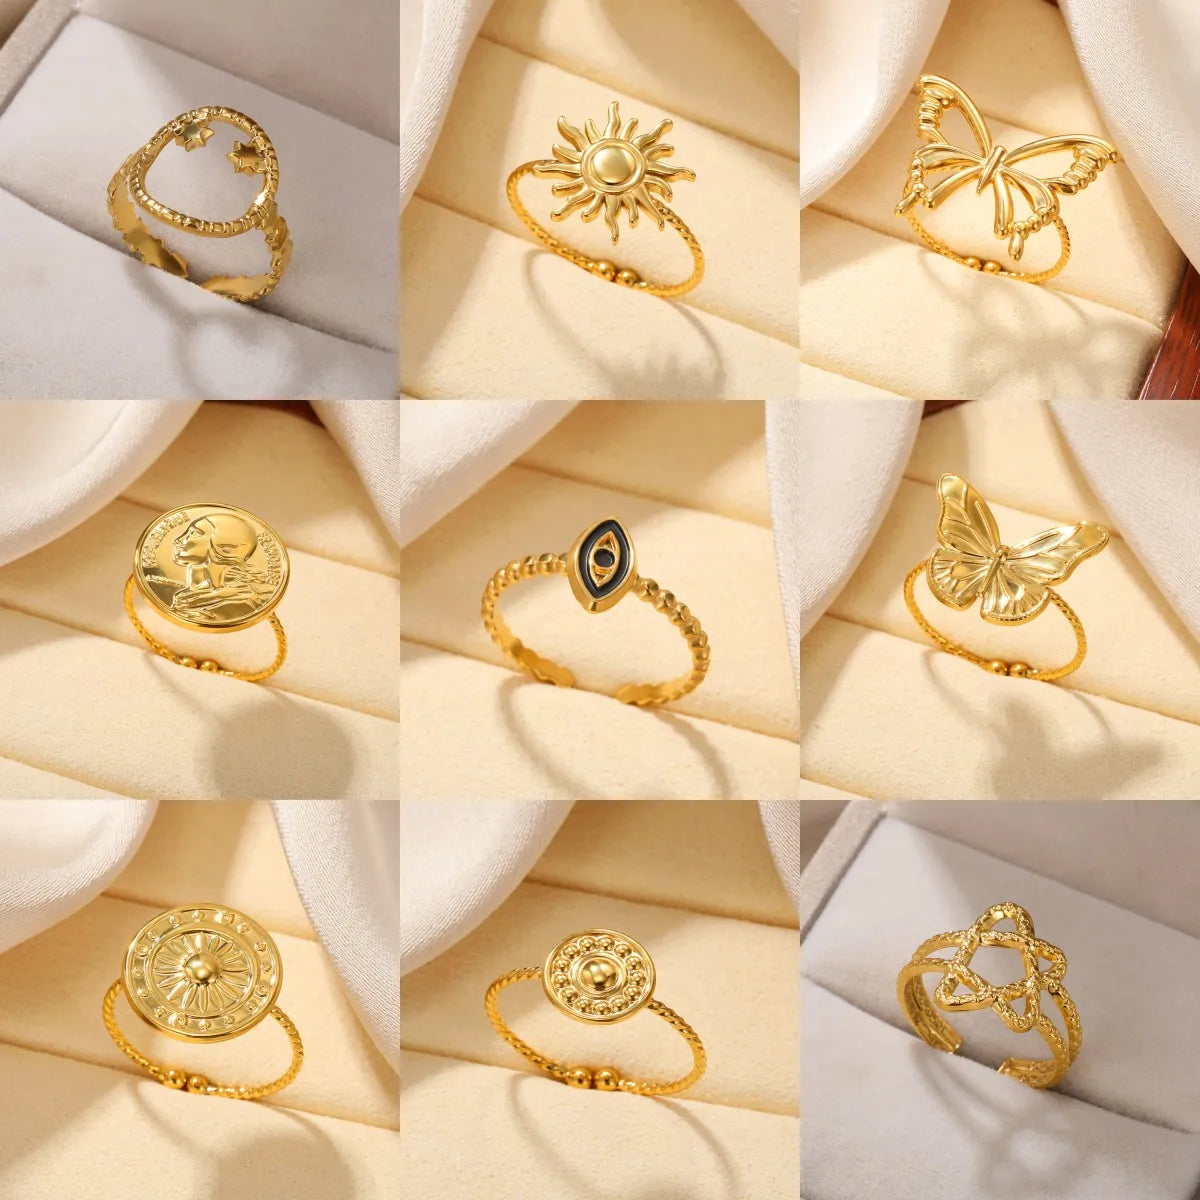 Ring Everything Round Open Rings For Women Men Trendy Party Gold Color Wedding Anniversary